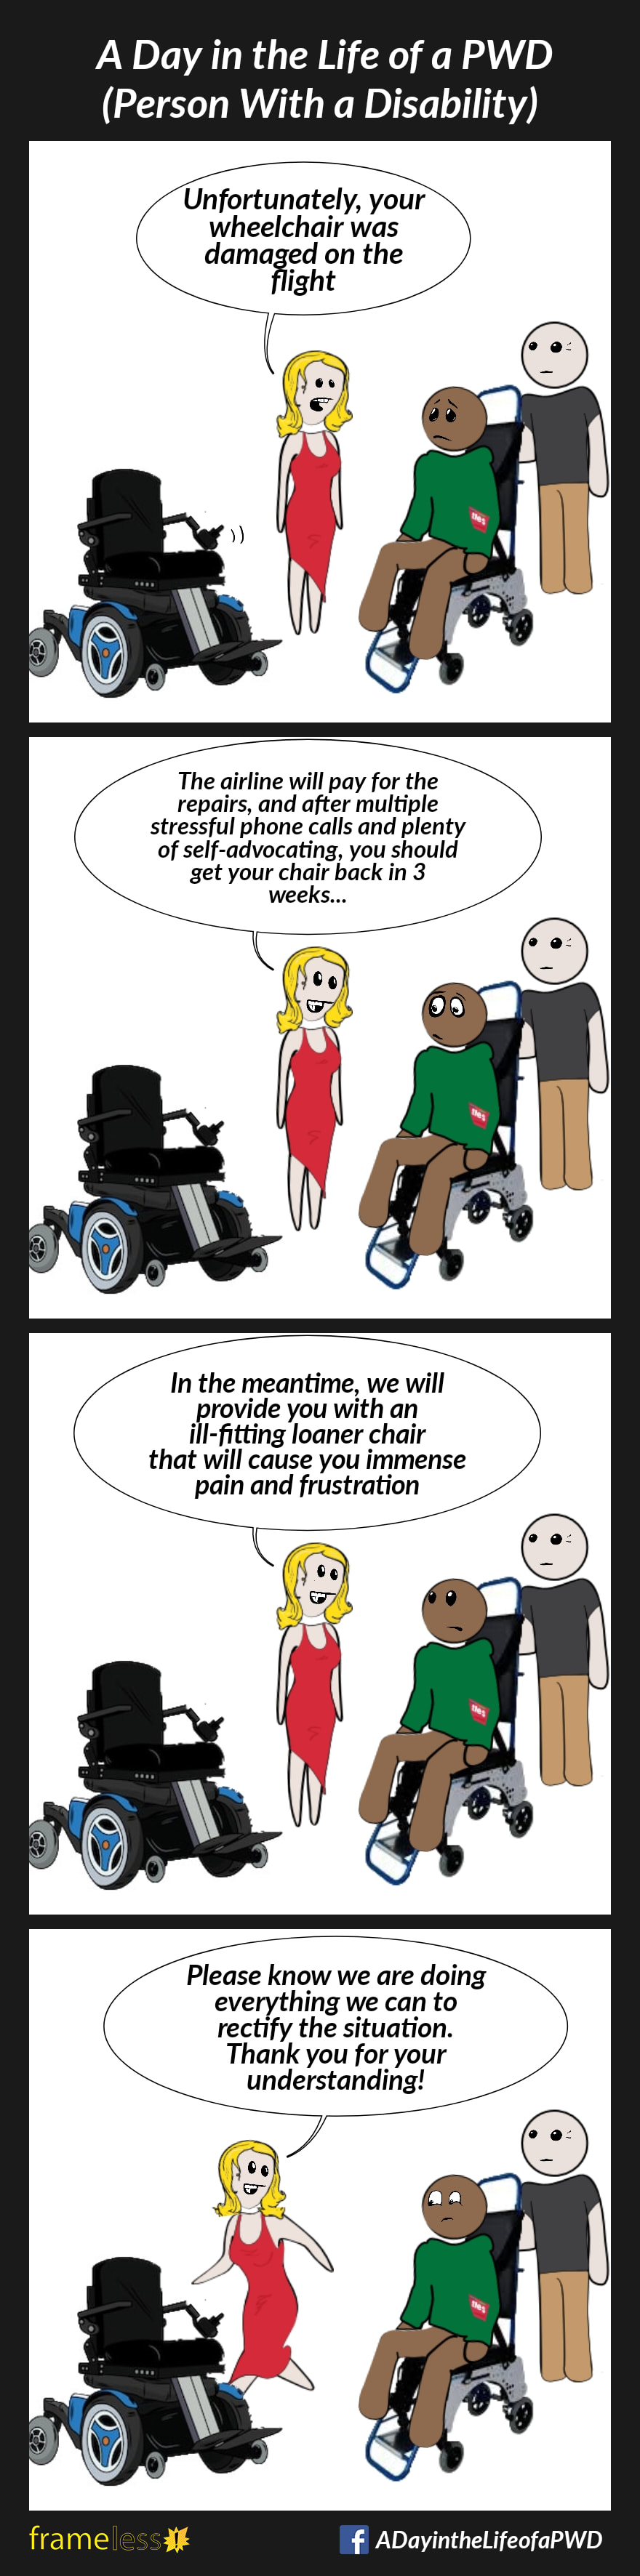 COMIC STRIP 
A Day in the Life of a PWD (Person With a Disability) 

Frame 1:
A man is sitting in a transport wheelchair at the airport, talking to a service agent. The controller on his power wheelchair is broken.
AGENT: Unfortunately, your wheelchair was damaged on the flight.

Frame 2:
AGENT: The airline will pay for the repairs, and after multiple stressful phone calls and plenty of self-advocating, you should get your chair back in 3 weeks...

Frame 3:
AGENT: In the meantime, we will provide you with an ill-fitting loaner chair that will cause you immense pain and frustration. 

Frame 4:
AGENT (walking away): Please know we are doing everything we can to rectify the situation. Thank you for your understanding!